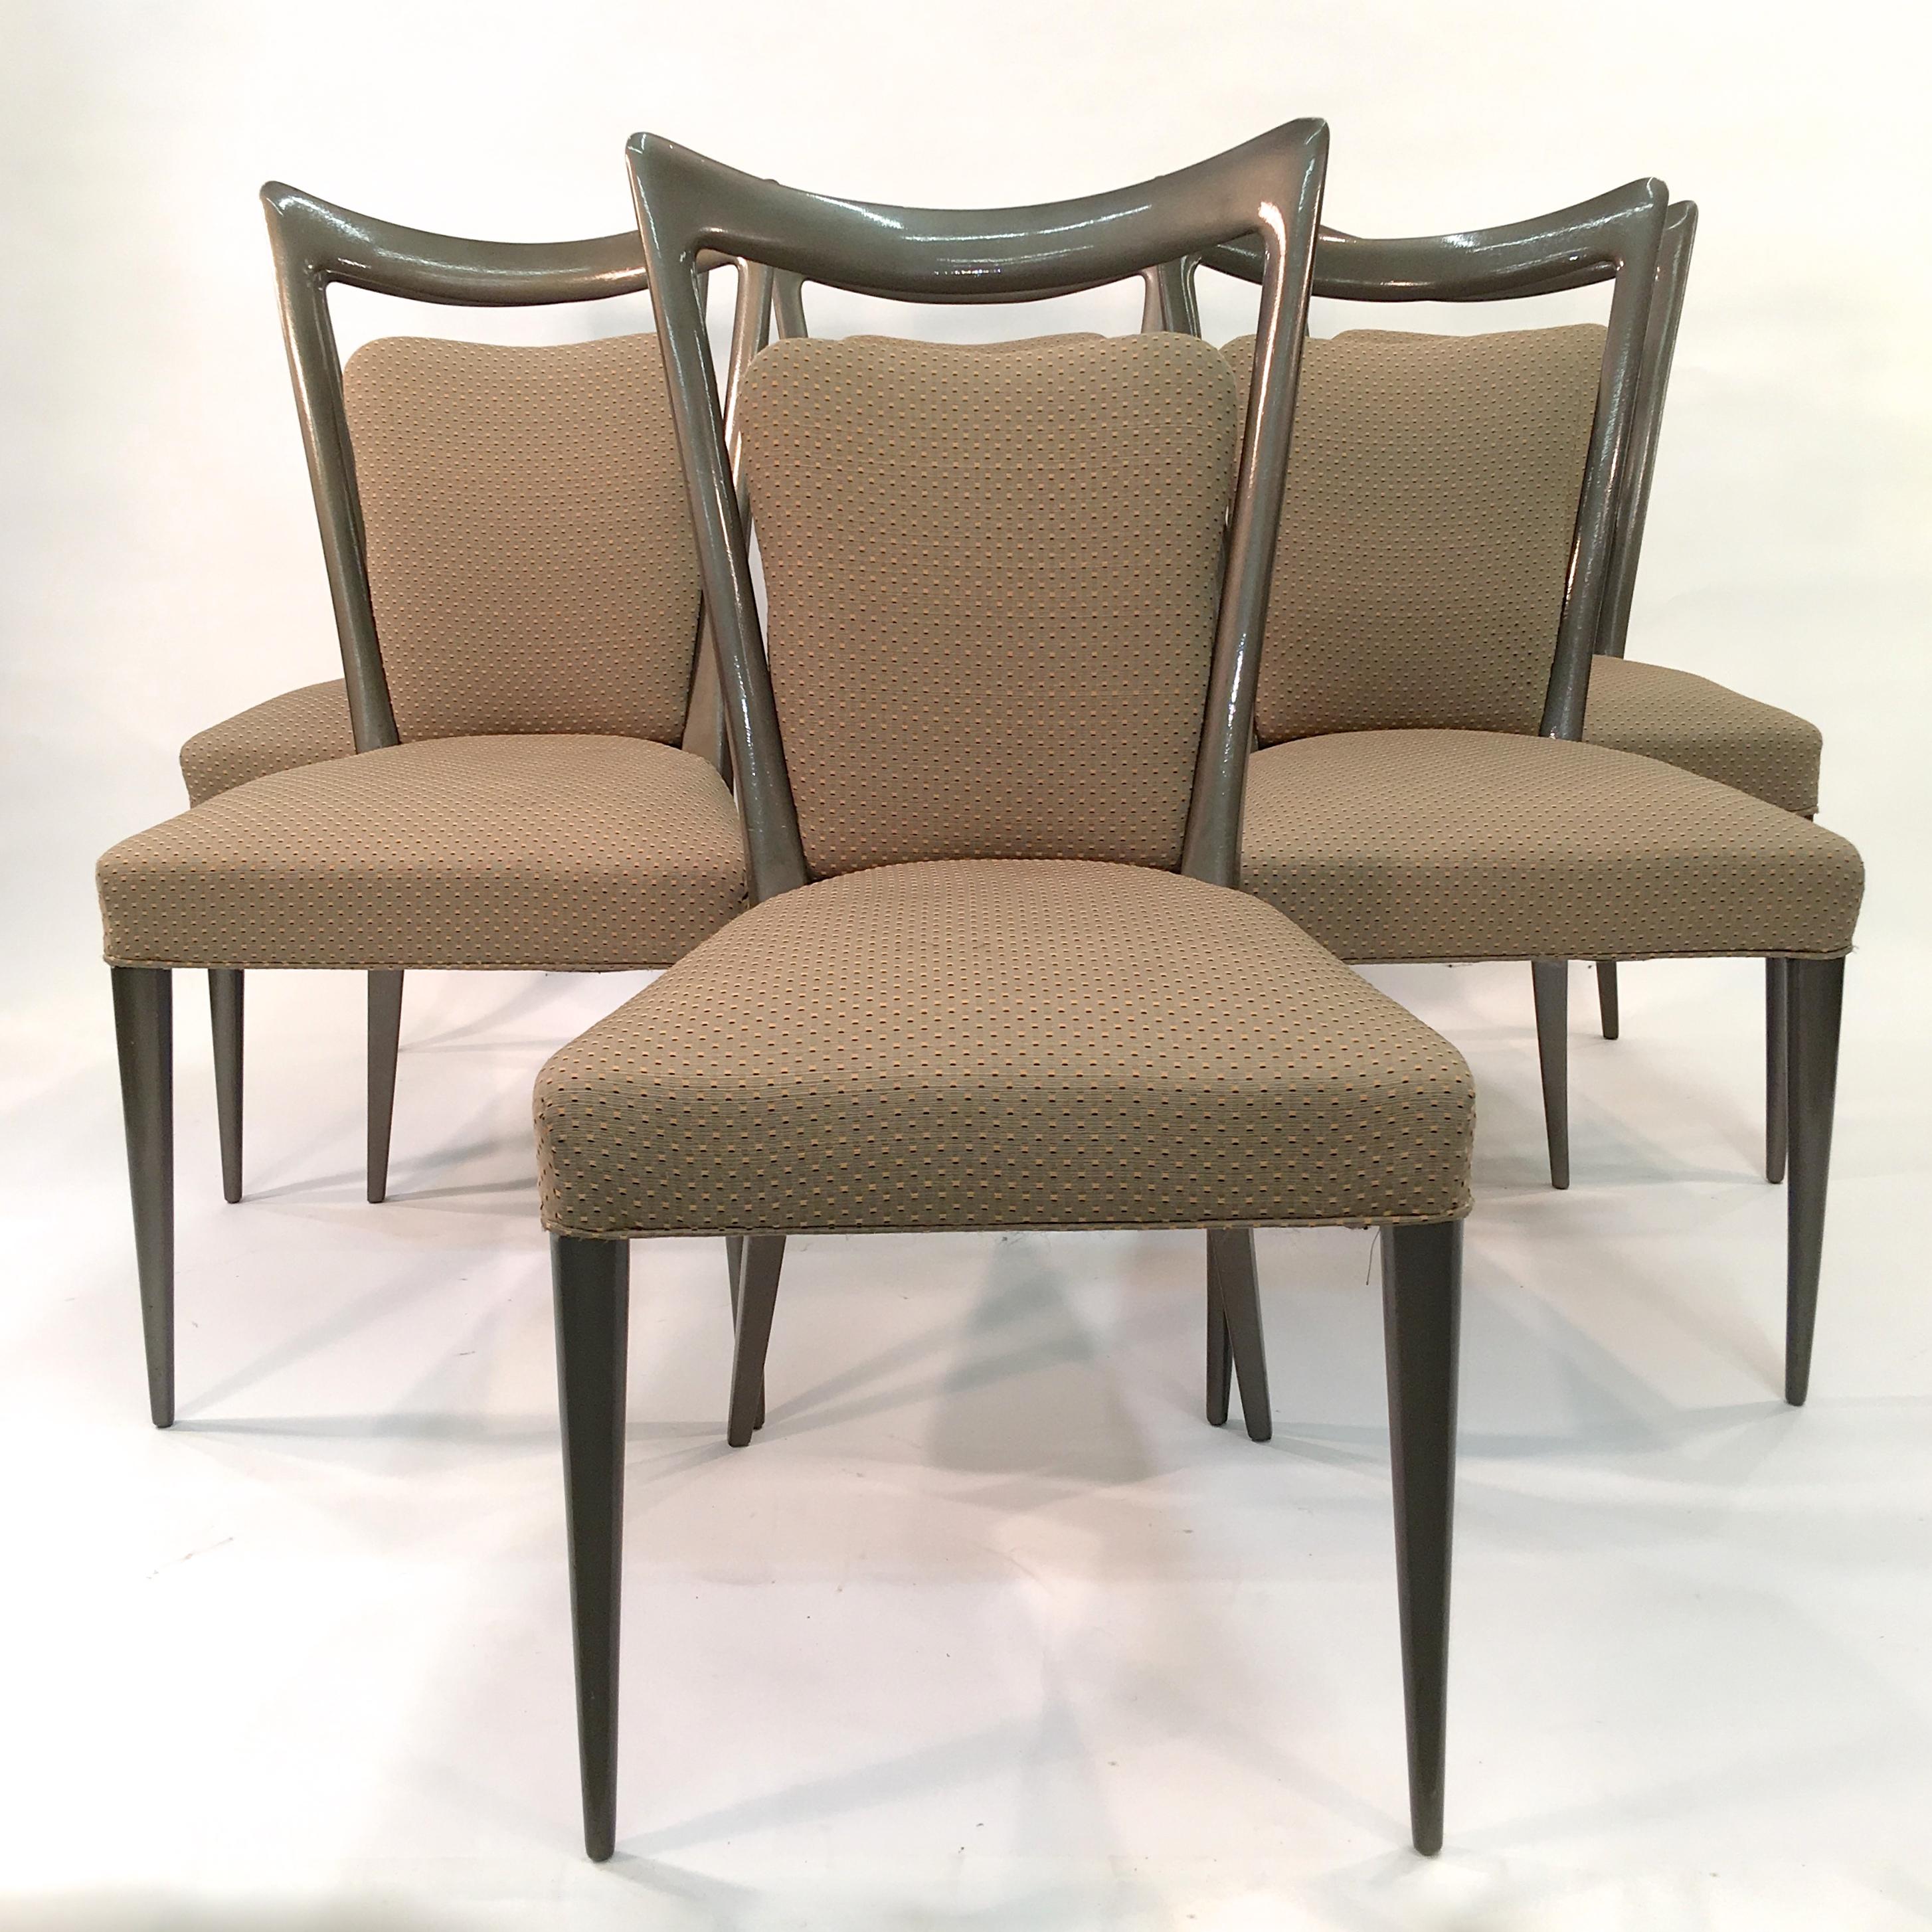 Set of six dining chairs designed by Melchiorre Bega in collaboration with Mario Gottardi and imported from Italy in the early 1950s by Fabry Associates.

The chairs have been lacquered a dark taupe which the color detection app on my phone says